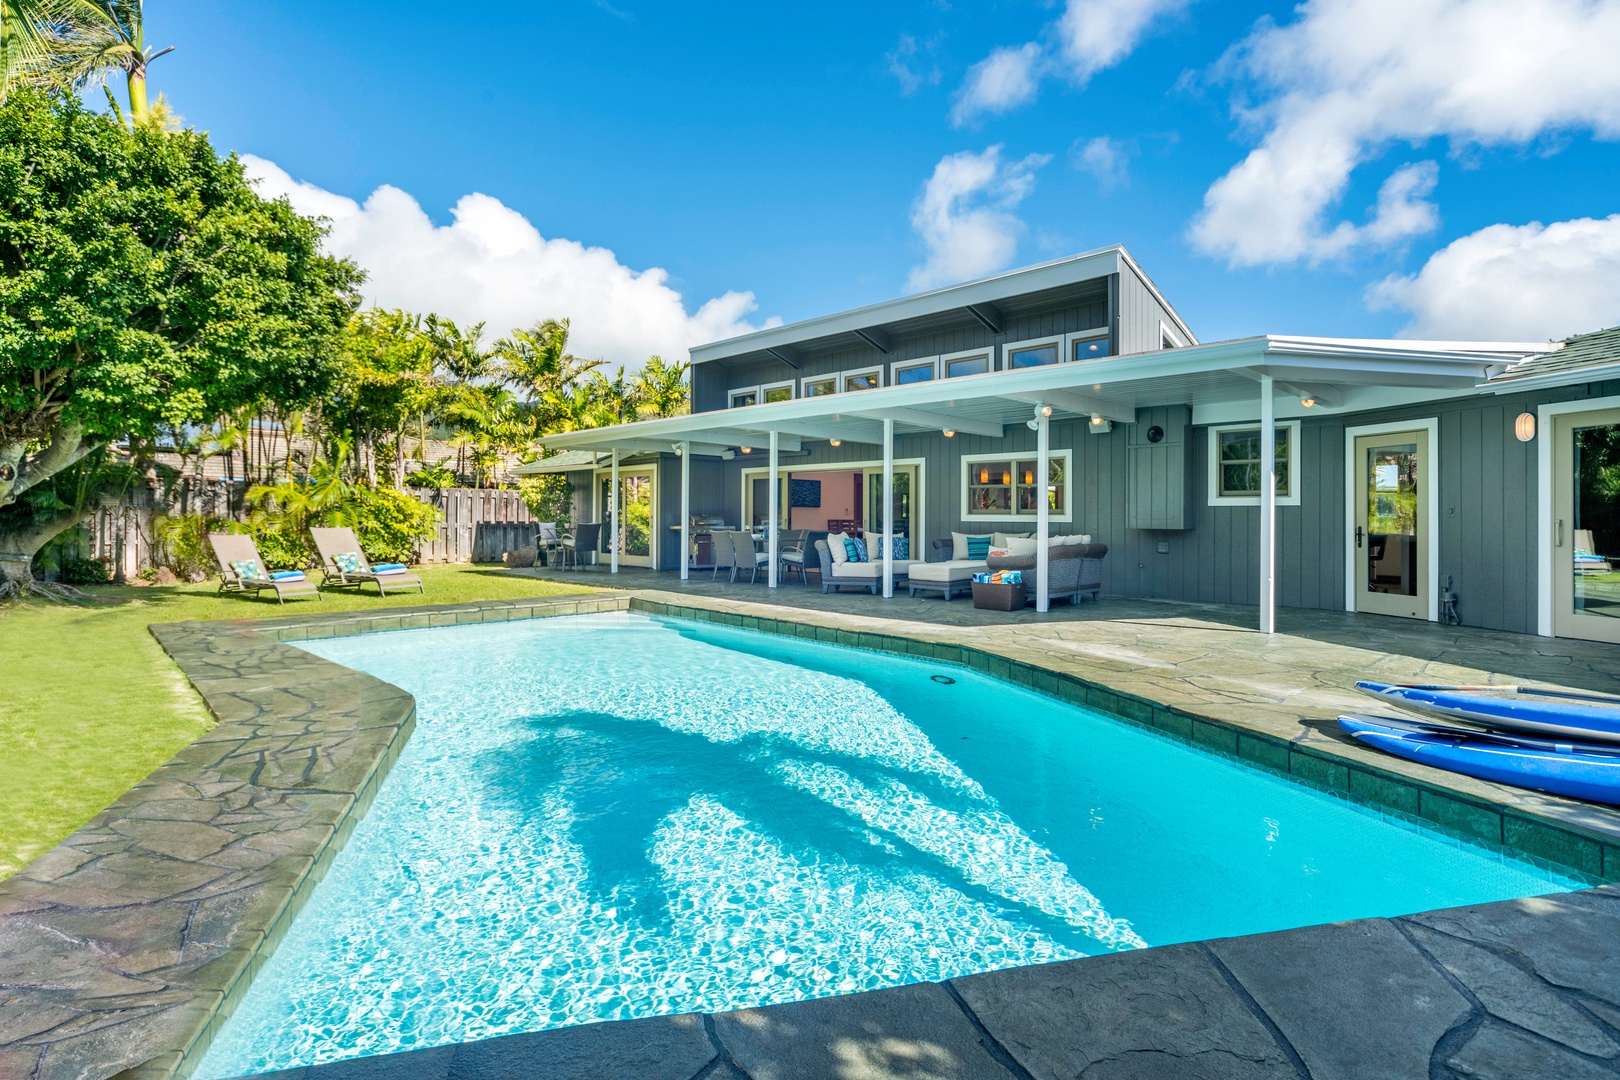 Honolulu Vacation Rentals, Hale Niuiki - Discover your escape haven, complete with a secluded backyard, pool, hammock, lounge areas, and BBQ setup.